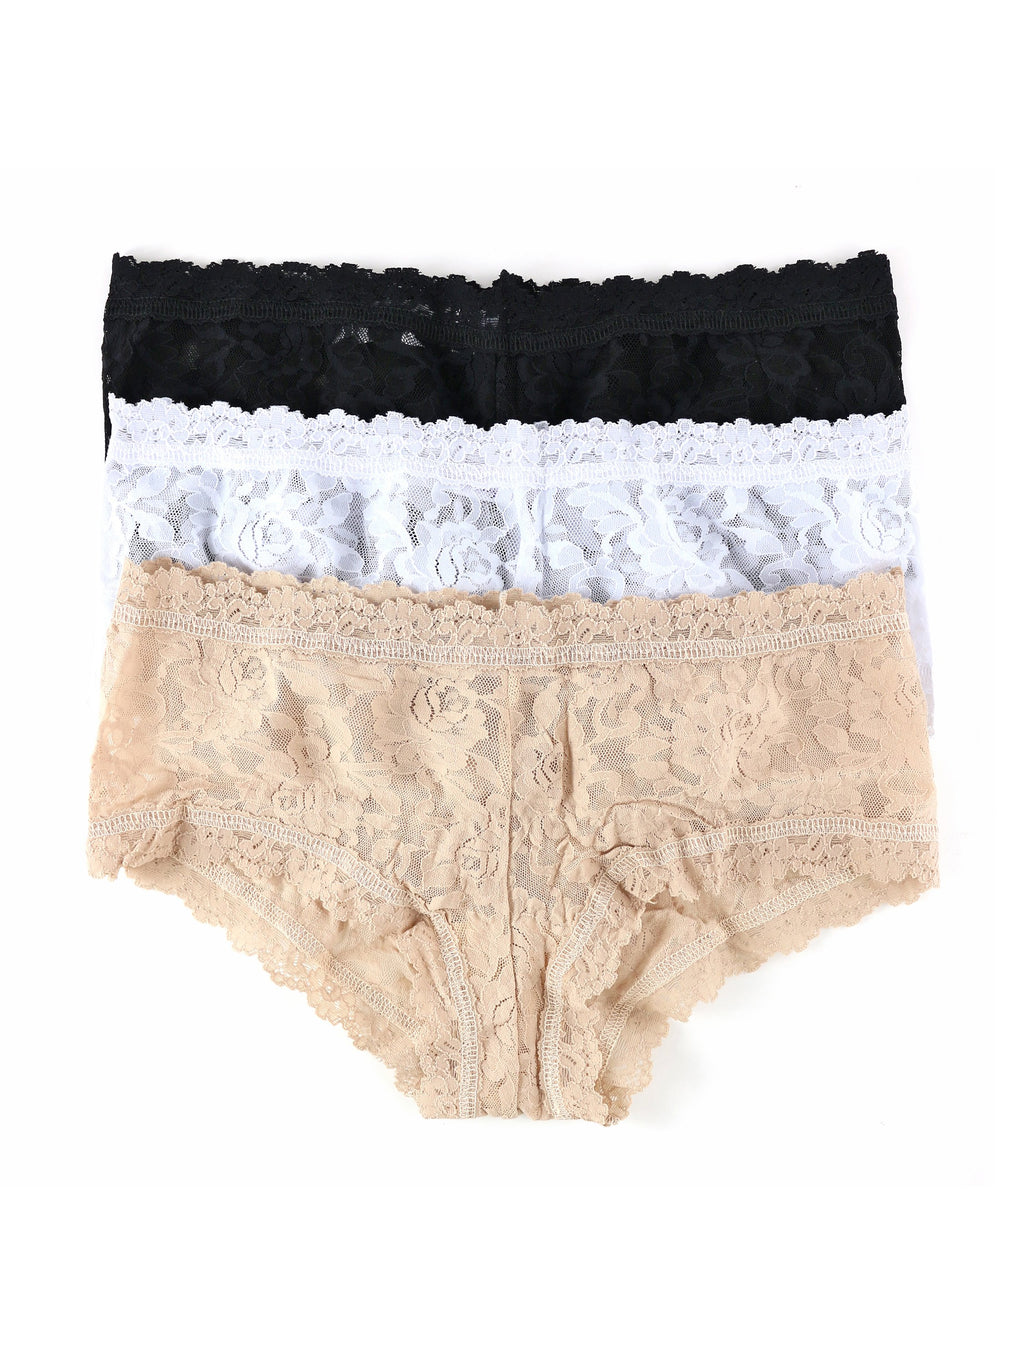 Patsy High-Waisted Underwear Pack | Dusty Earth Hues